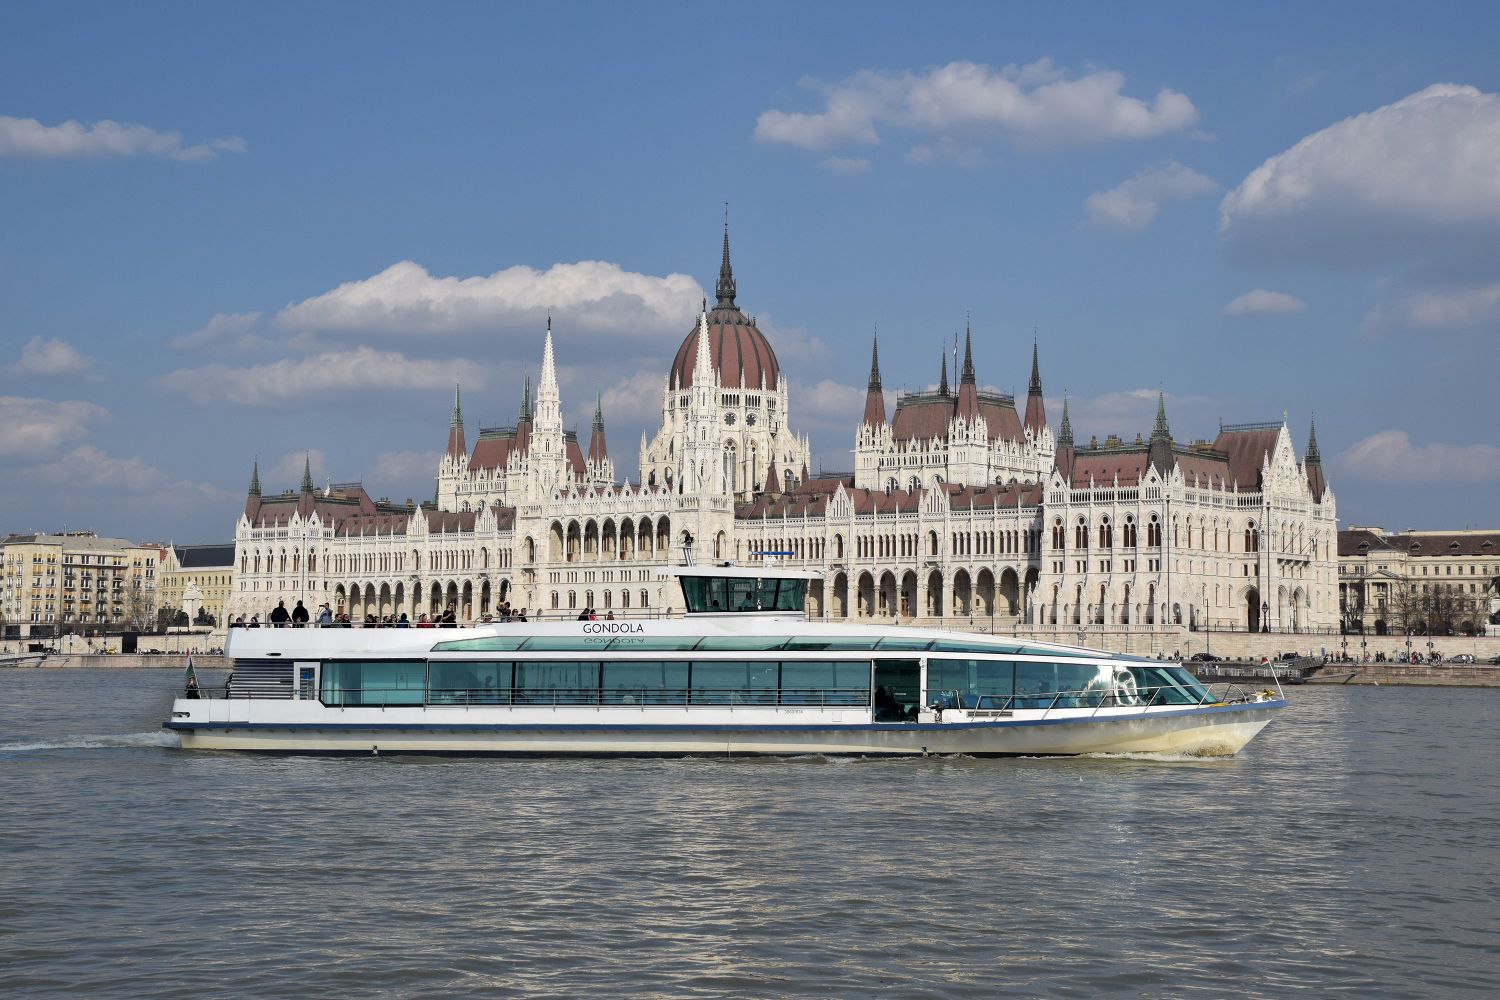 [SALE] Morning or Afternoon Sightseeing Cruise on Danube River in